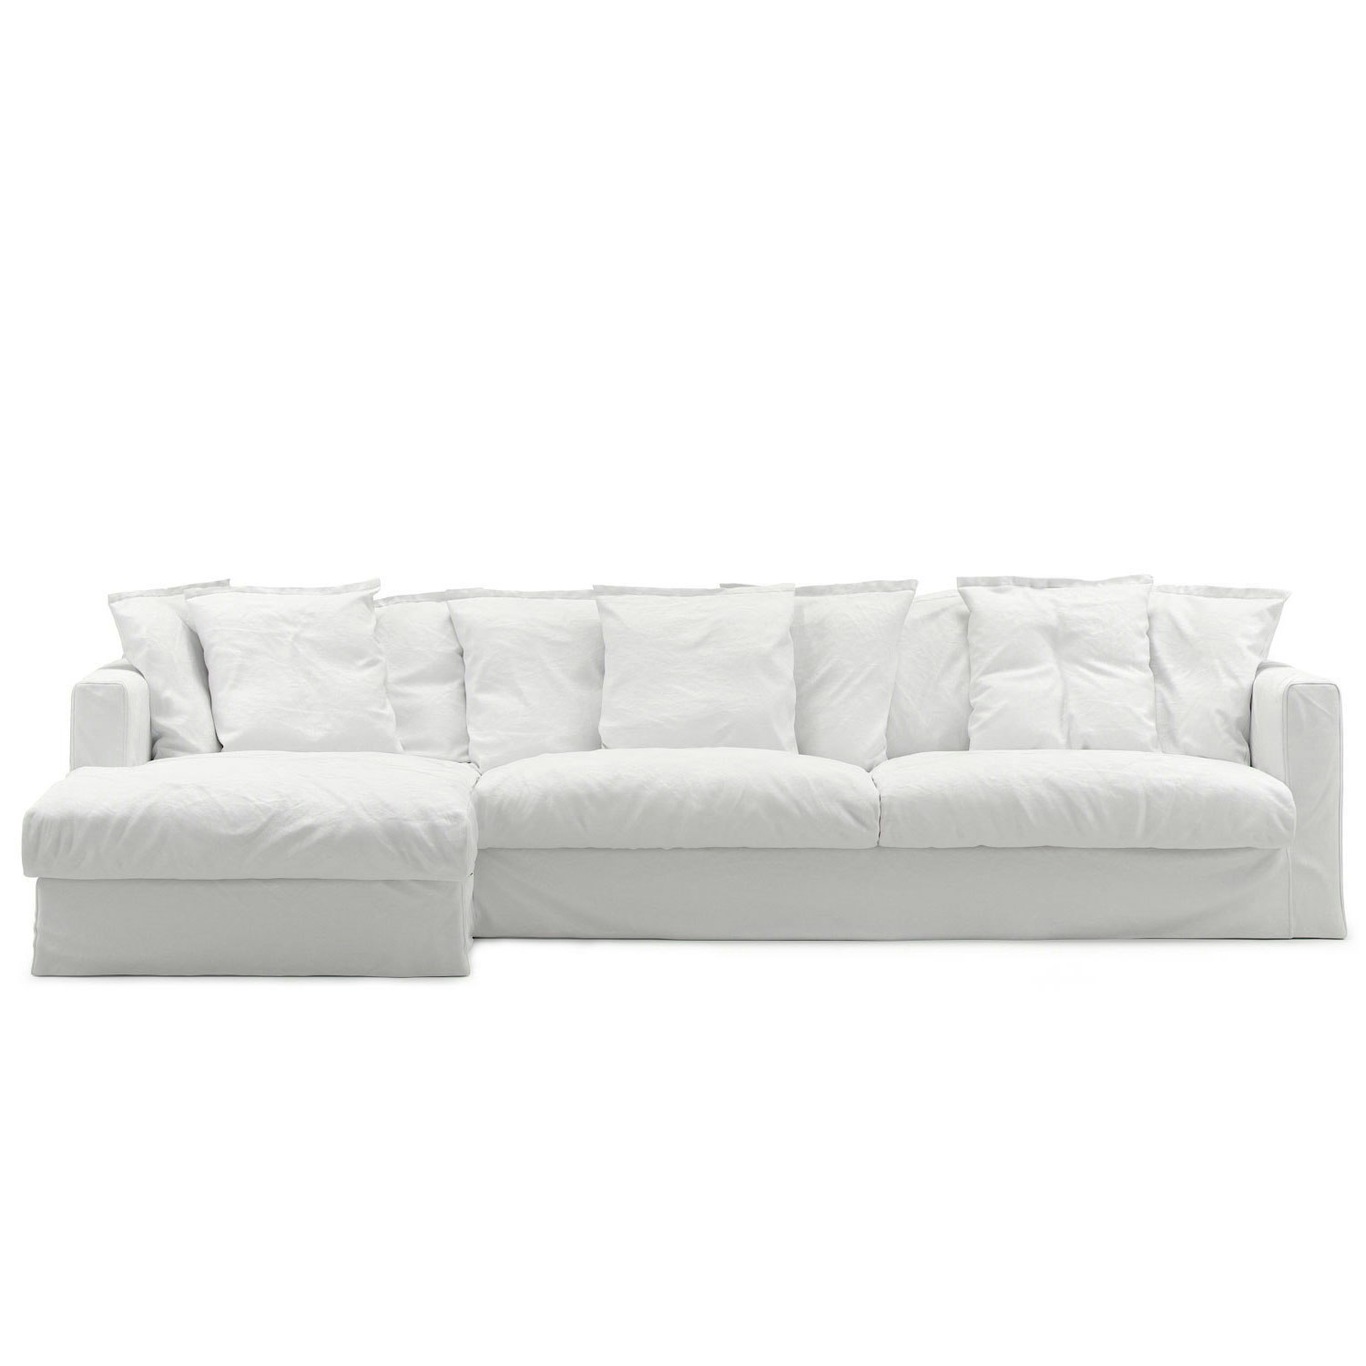 Le Grand Air Upholstery 3-Seater Cotton Divan Left, White